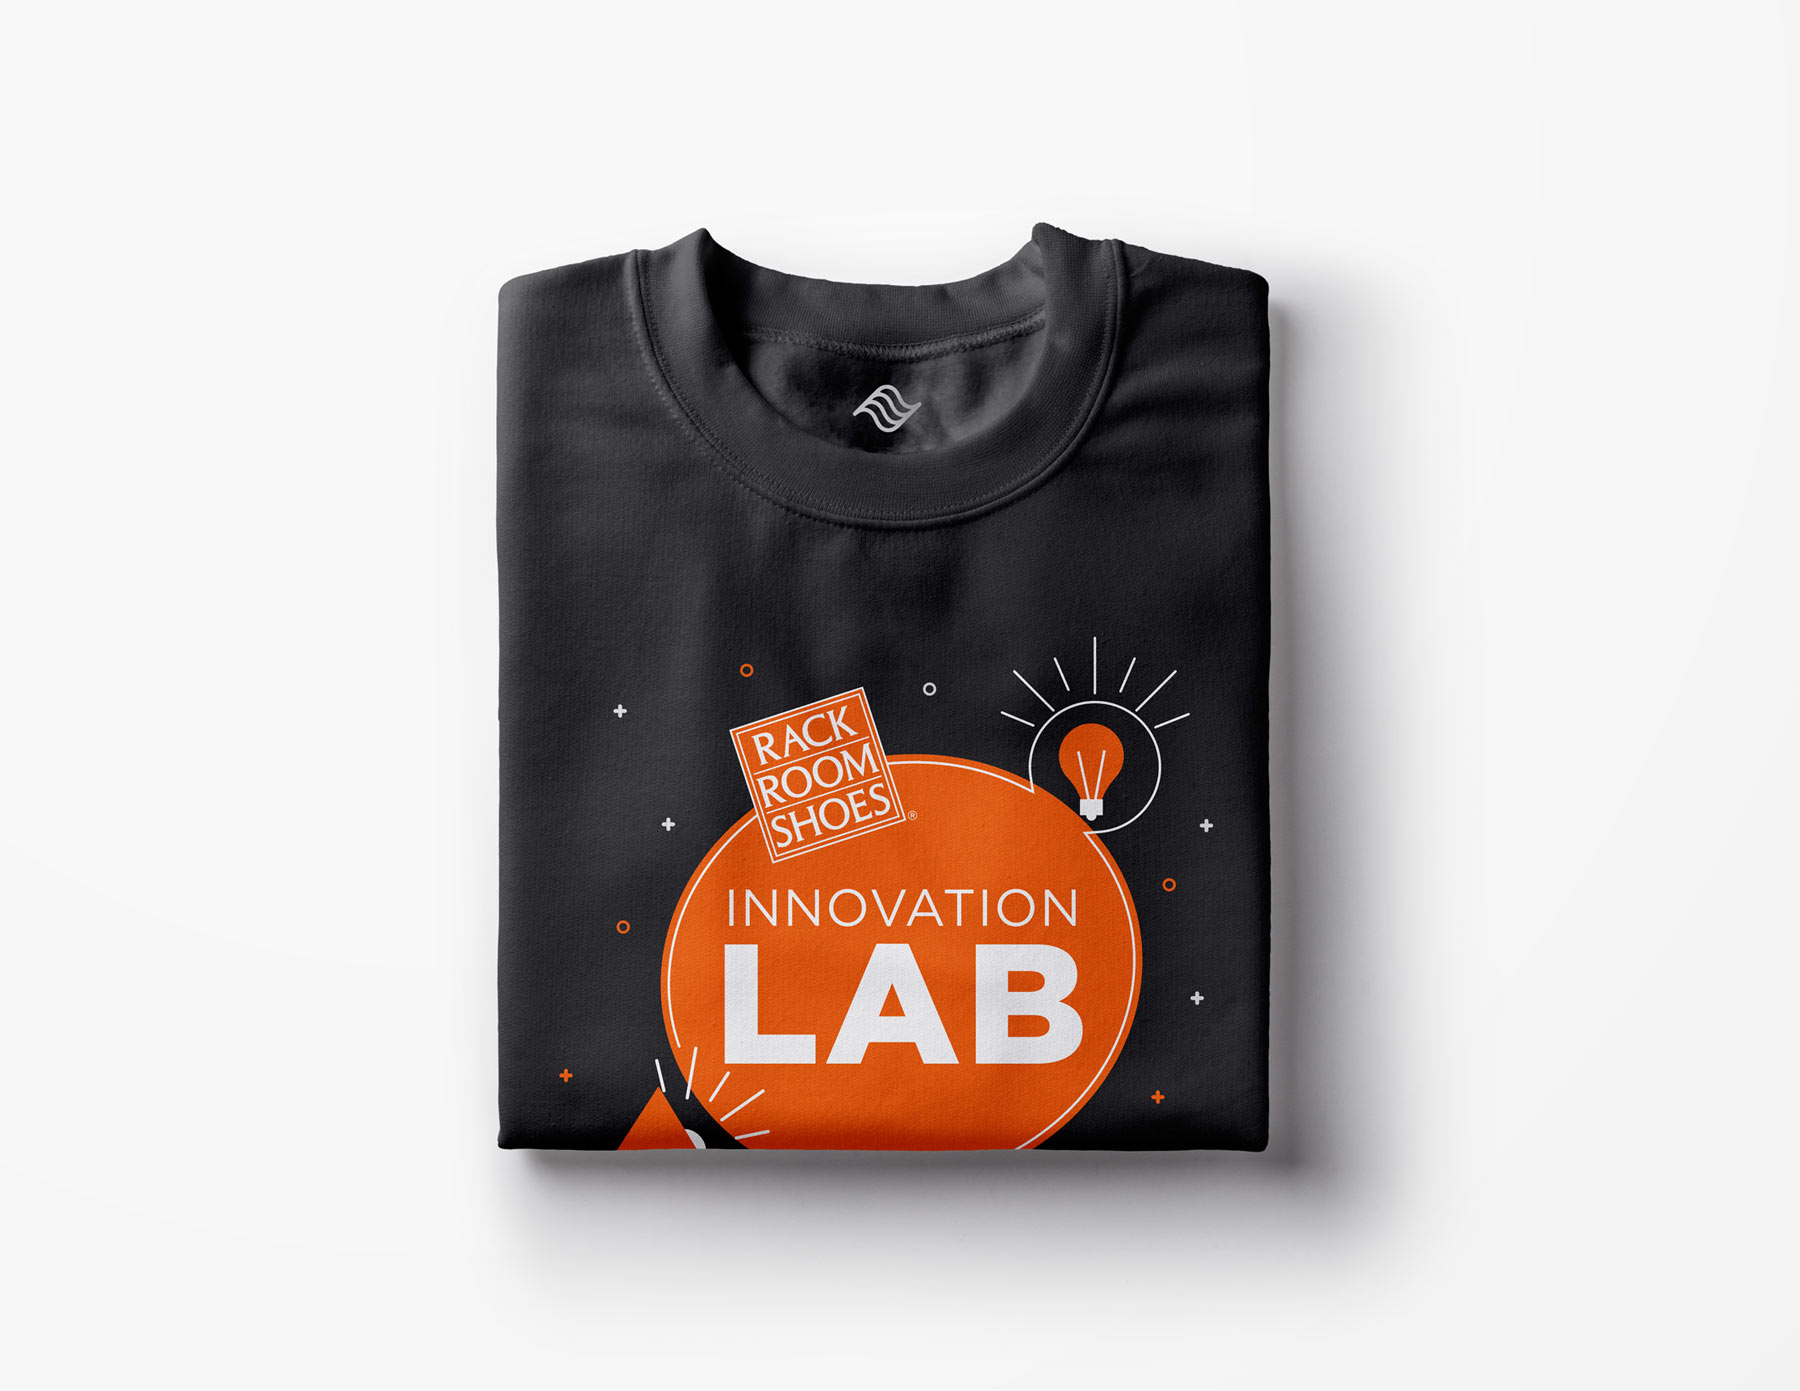 black t-shirt with the innovation lab logo on it posted on a white background